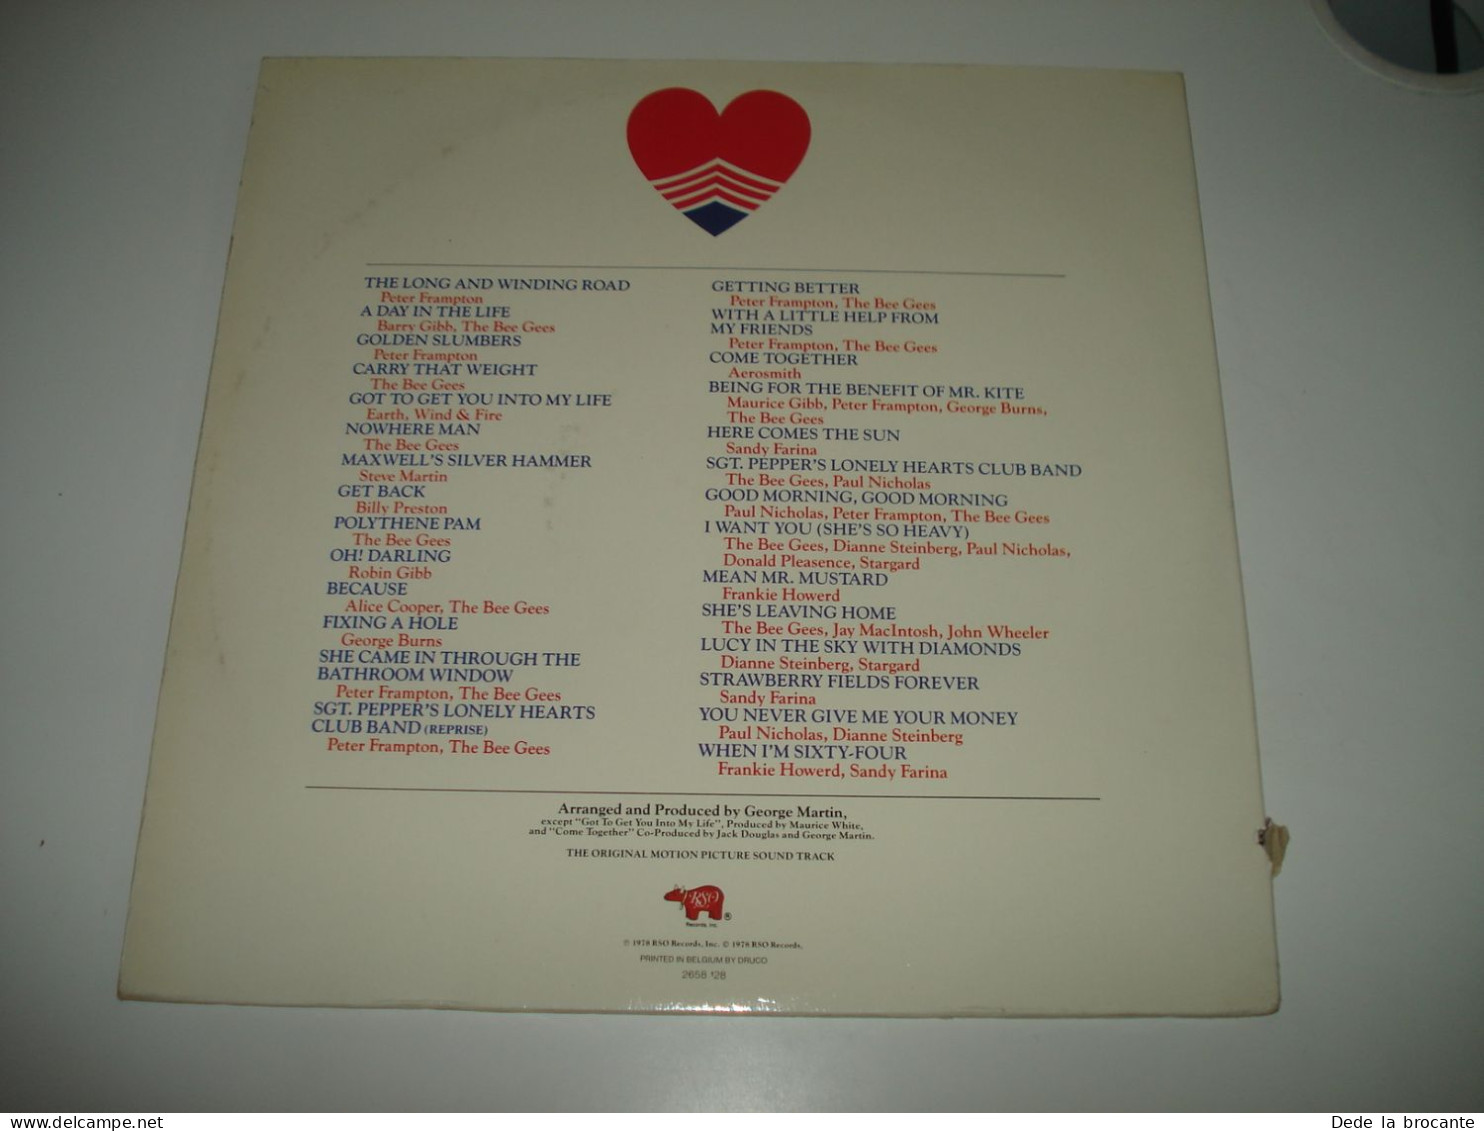 B8 / Sgt Pepper's Lonely Hearts Club Band  Bee Gees - 2658 128 - BE 1978 - M/VG+ - Musique De Films